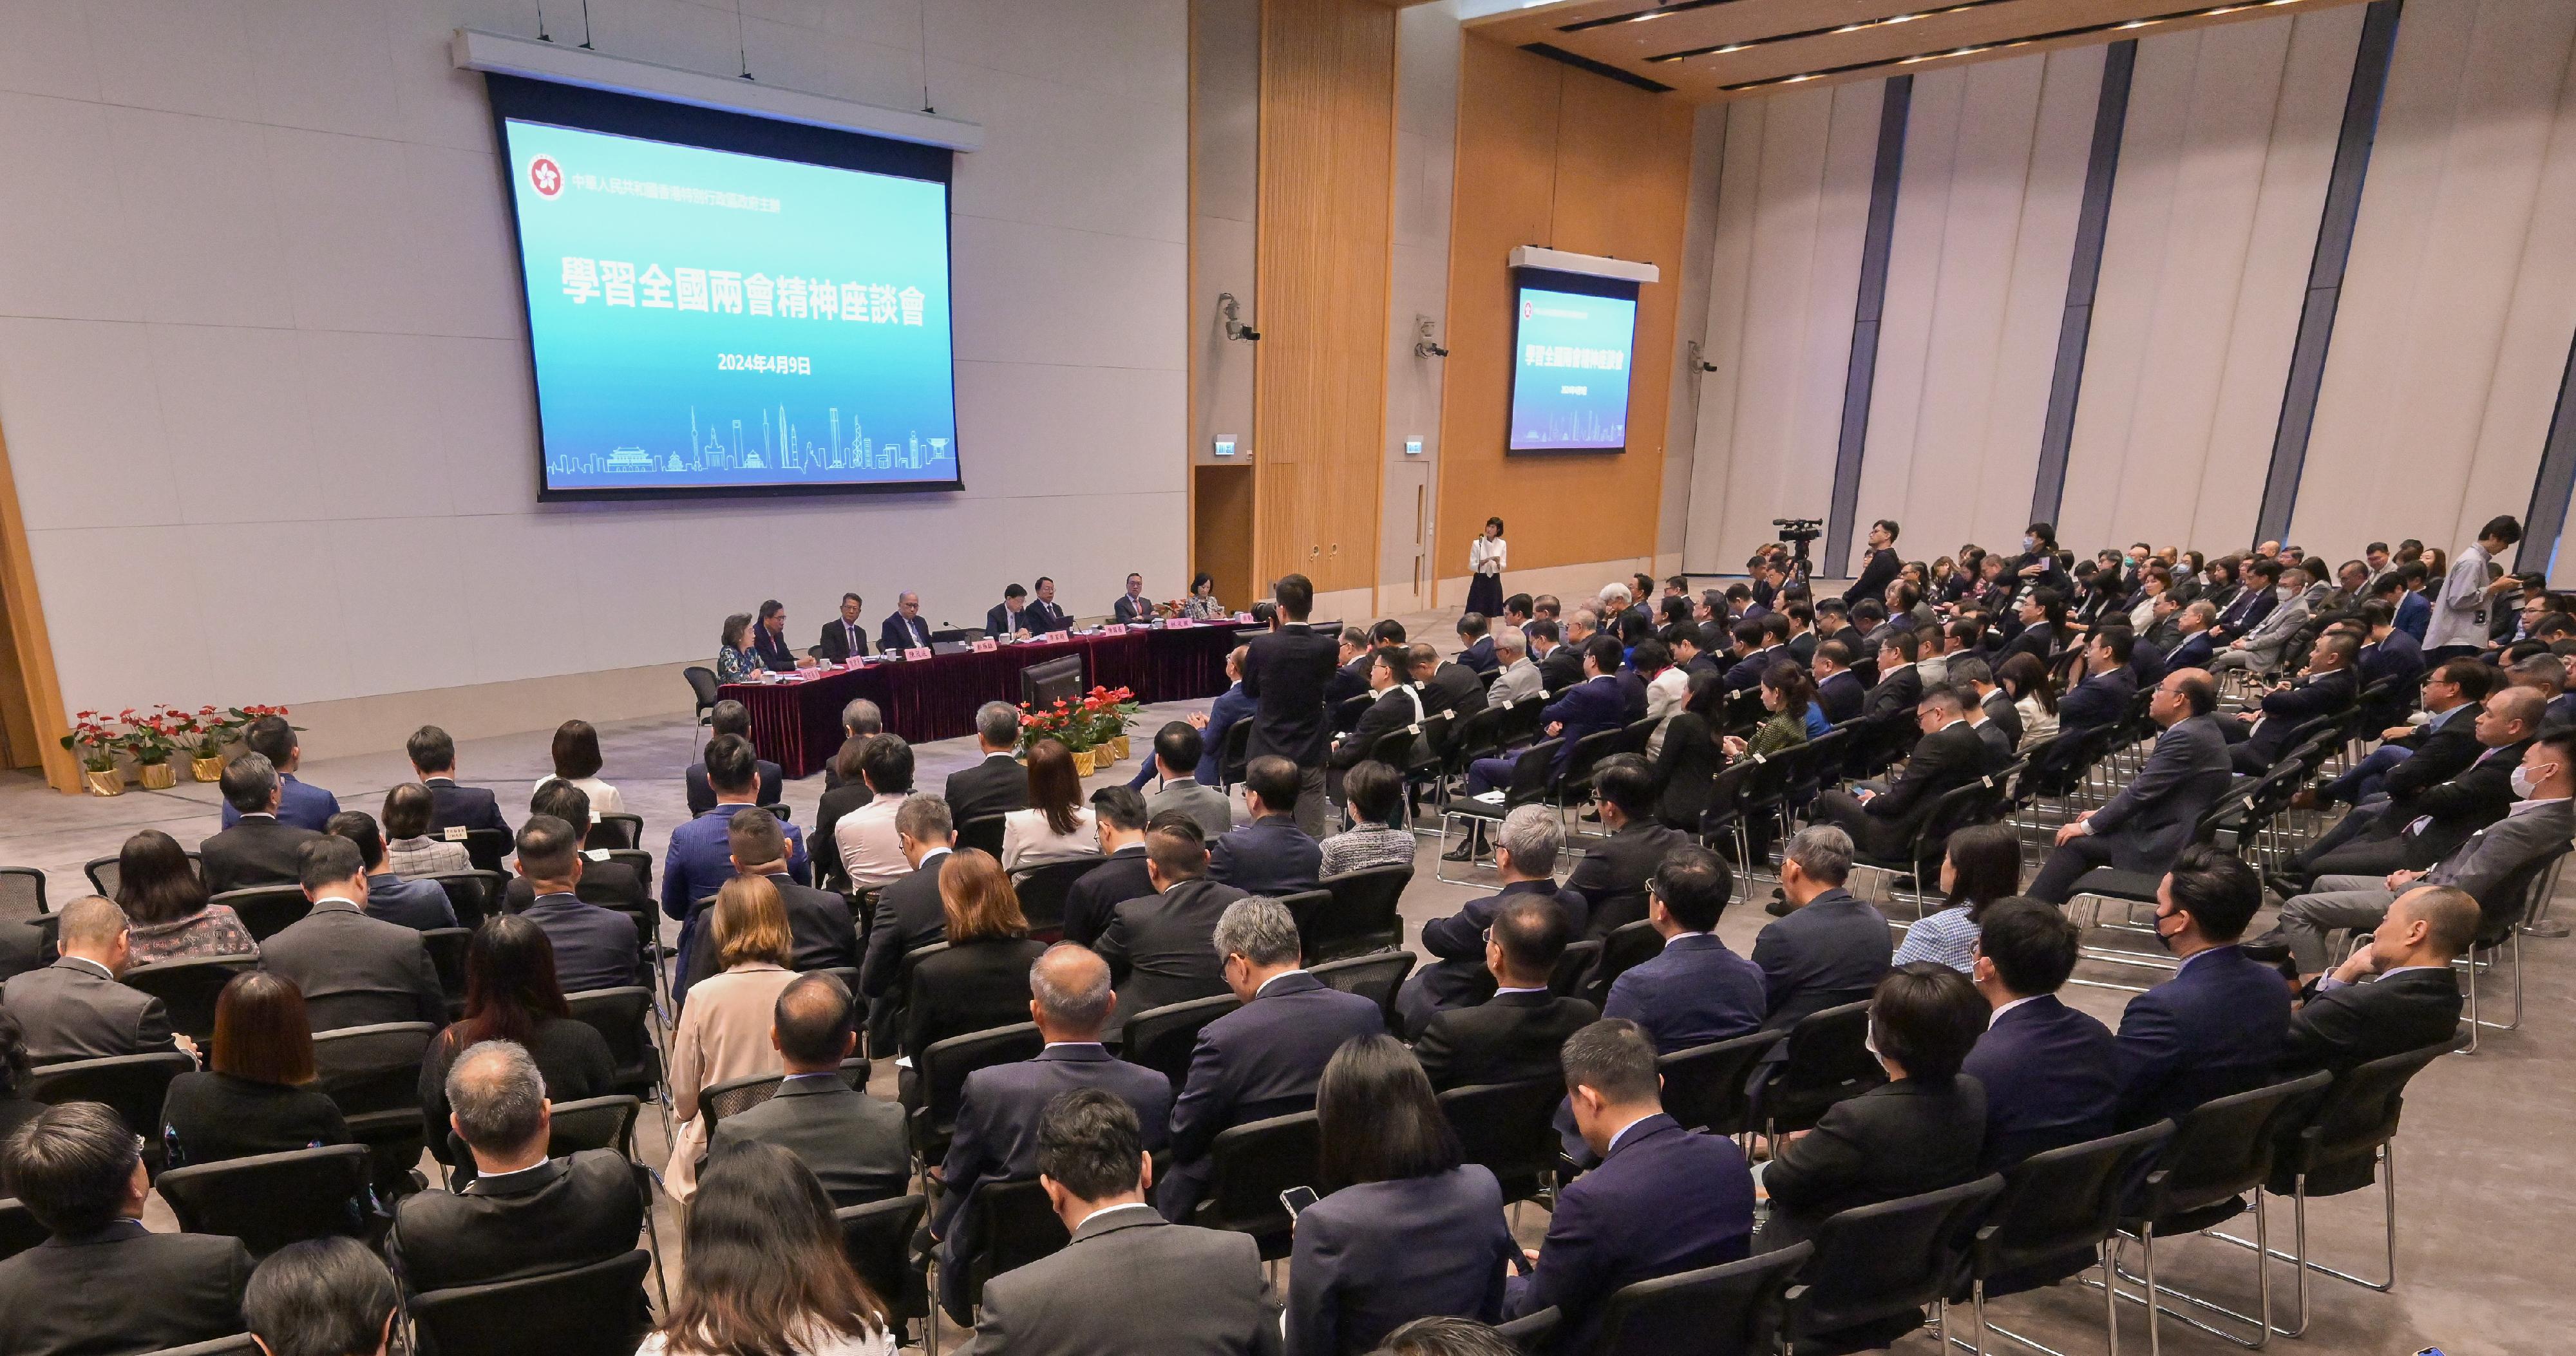 The Hong Kong Special Administrative Region Government today (April 9) held a seminar on learning the spirit of the "two sessions" at the Central Government Offices. The seminar was attended by more than 200 participants, including Principal Officials of the HKSAR Government, Members of the Executive Council and Legislative Council, Permanent Secretaries and Heads of Department.